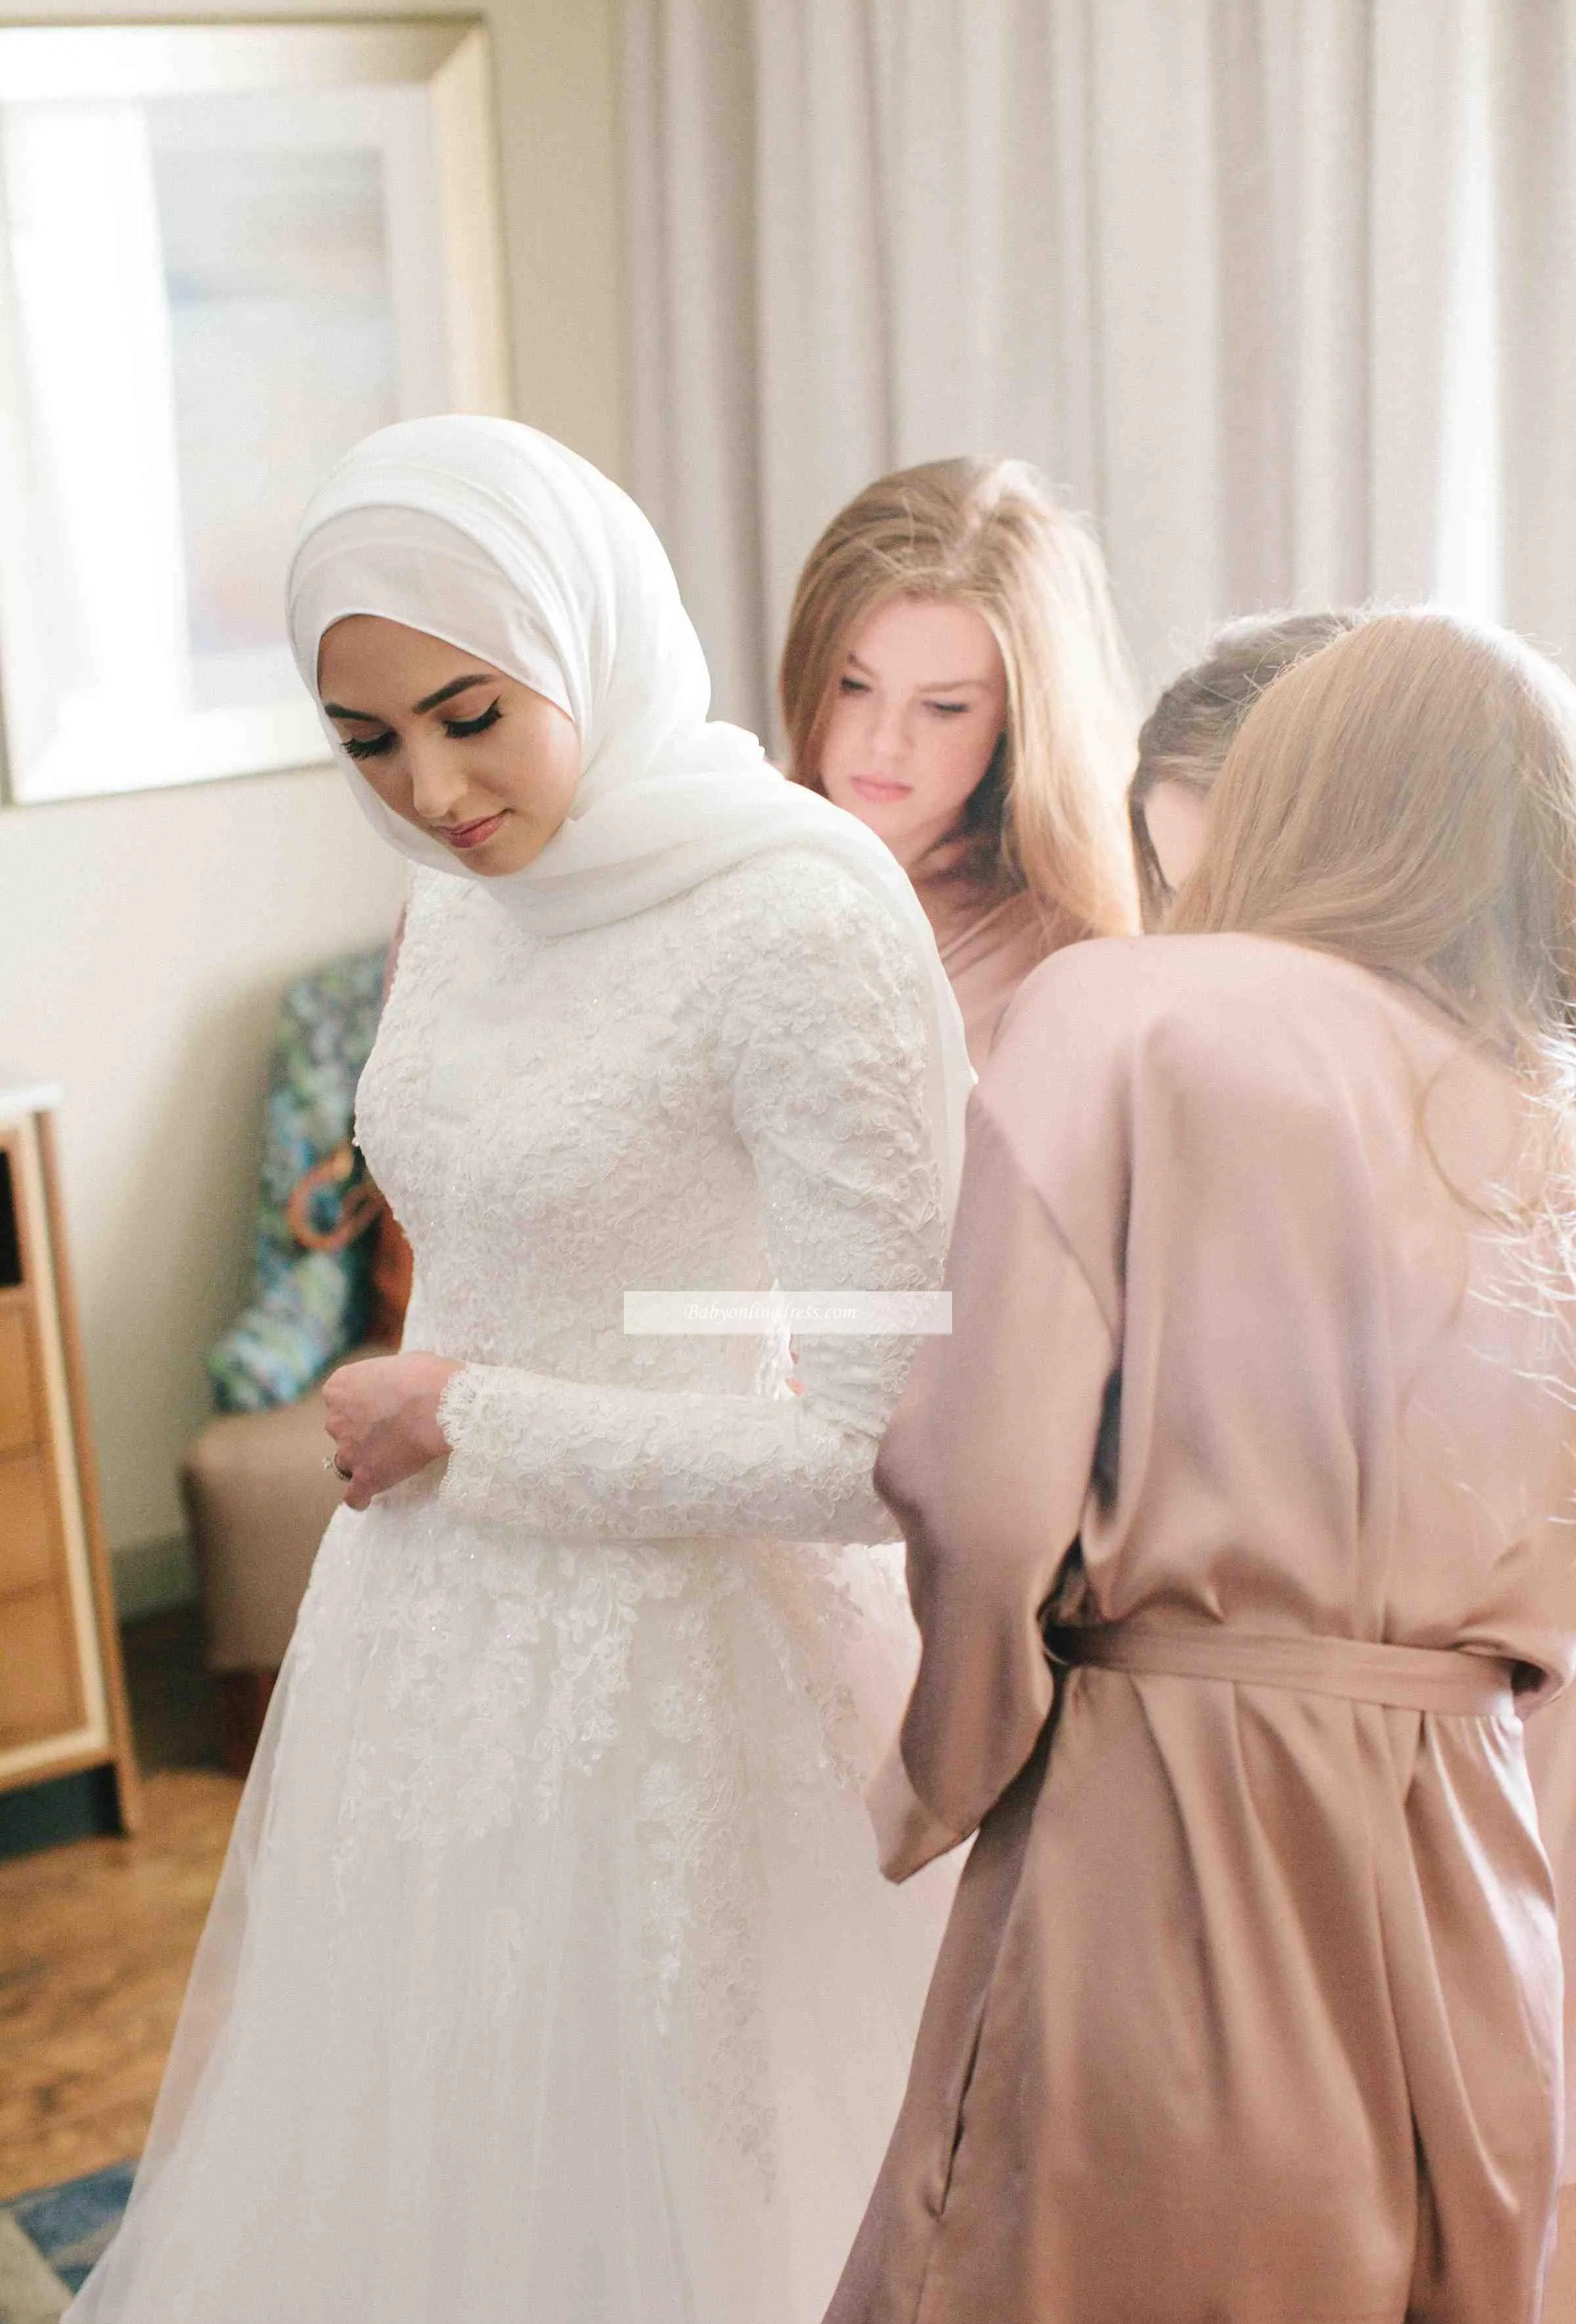 New Arrival Arabic Muslim Wedding Dress ALine High Neck Tulle Long Sleeves Country Garden Bride Bridal Gown Custom Made Plus Size1966860